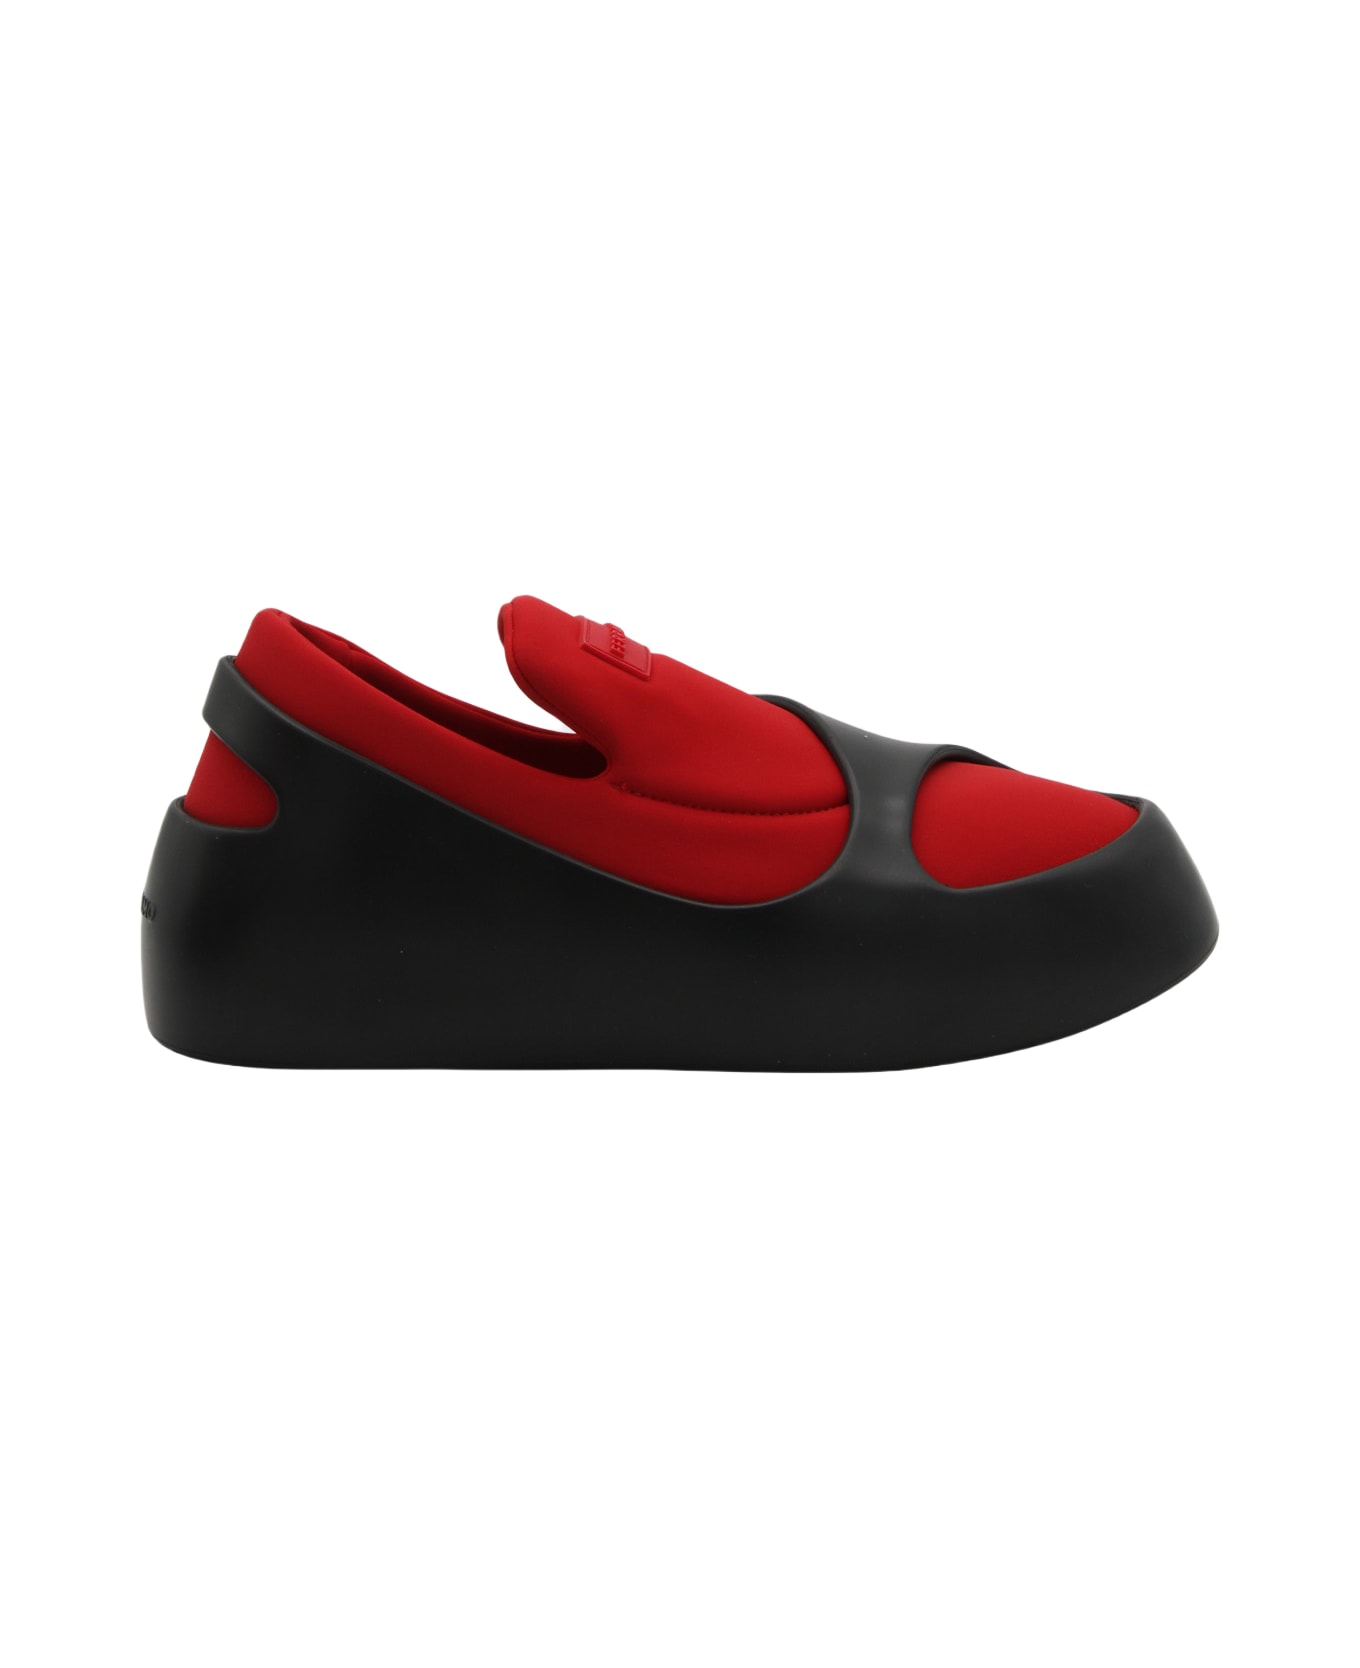 Ferragamo Black And Red Lunar Sneakers - BLACK-RED